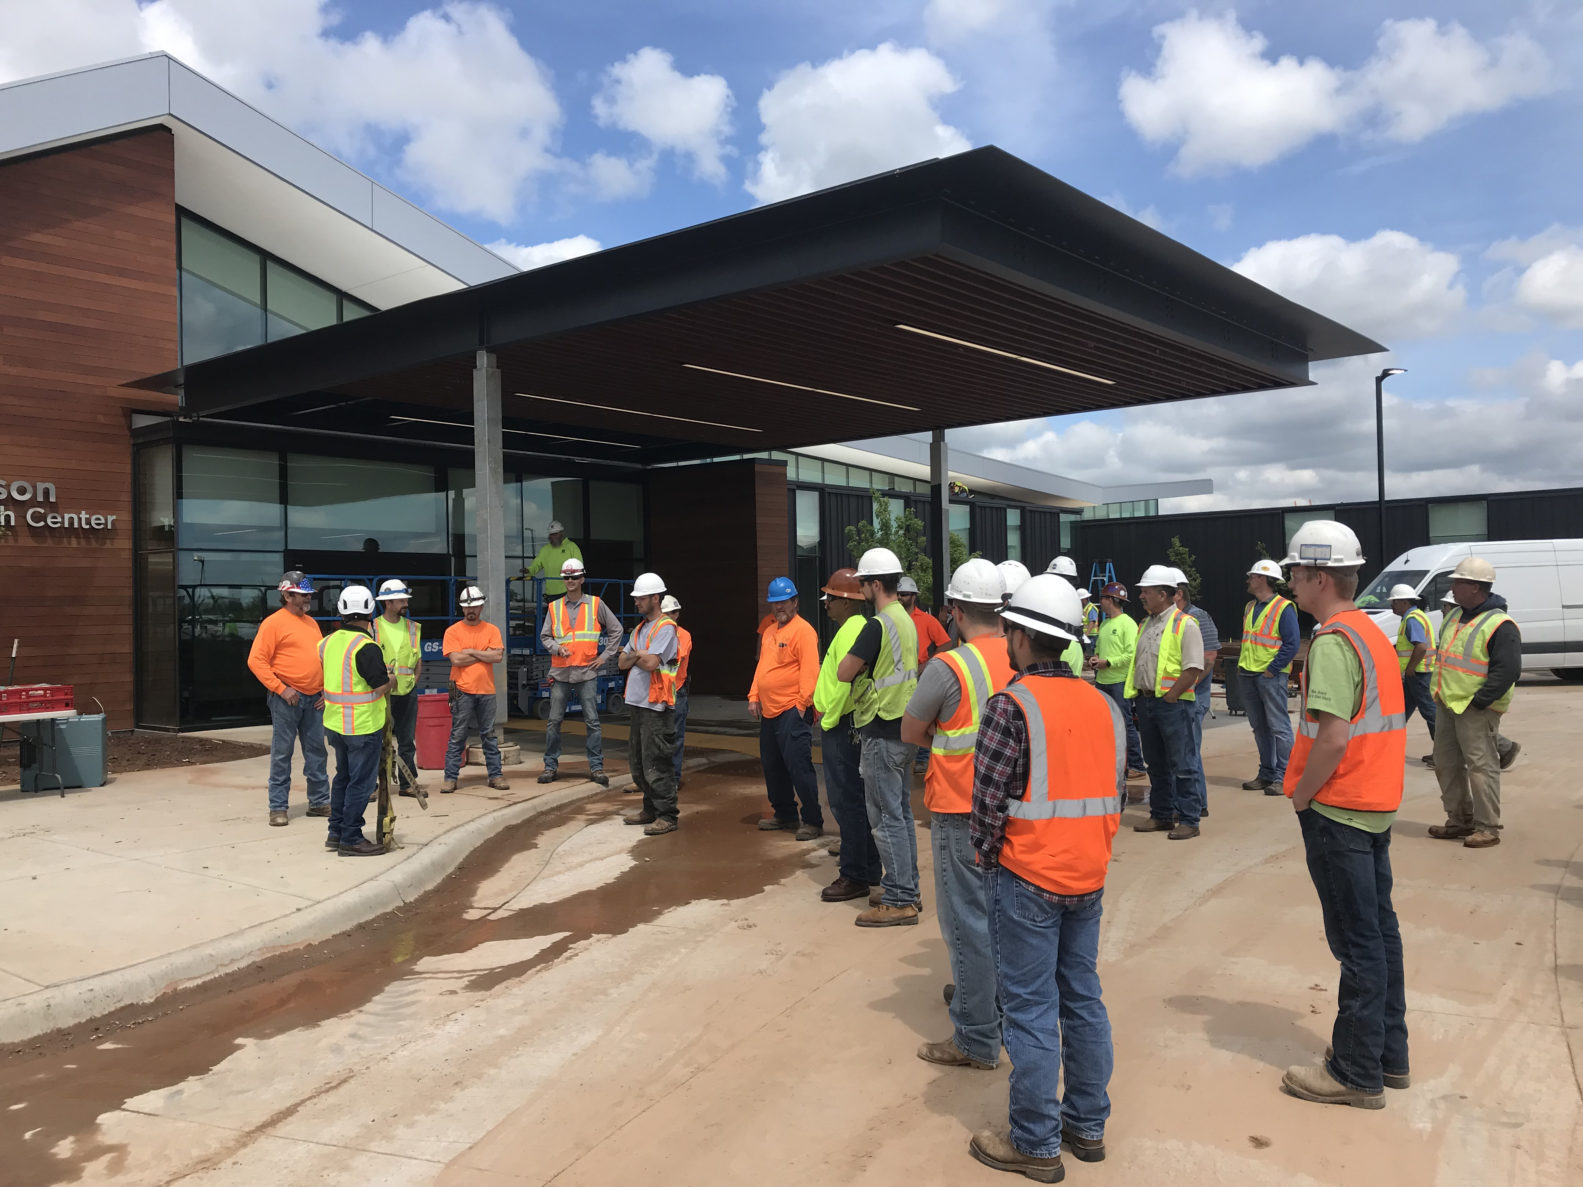 A safety meeting taking place on a McCownGordon Construction project site